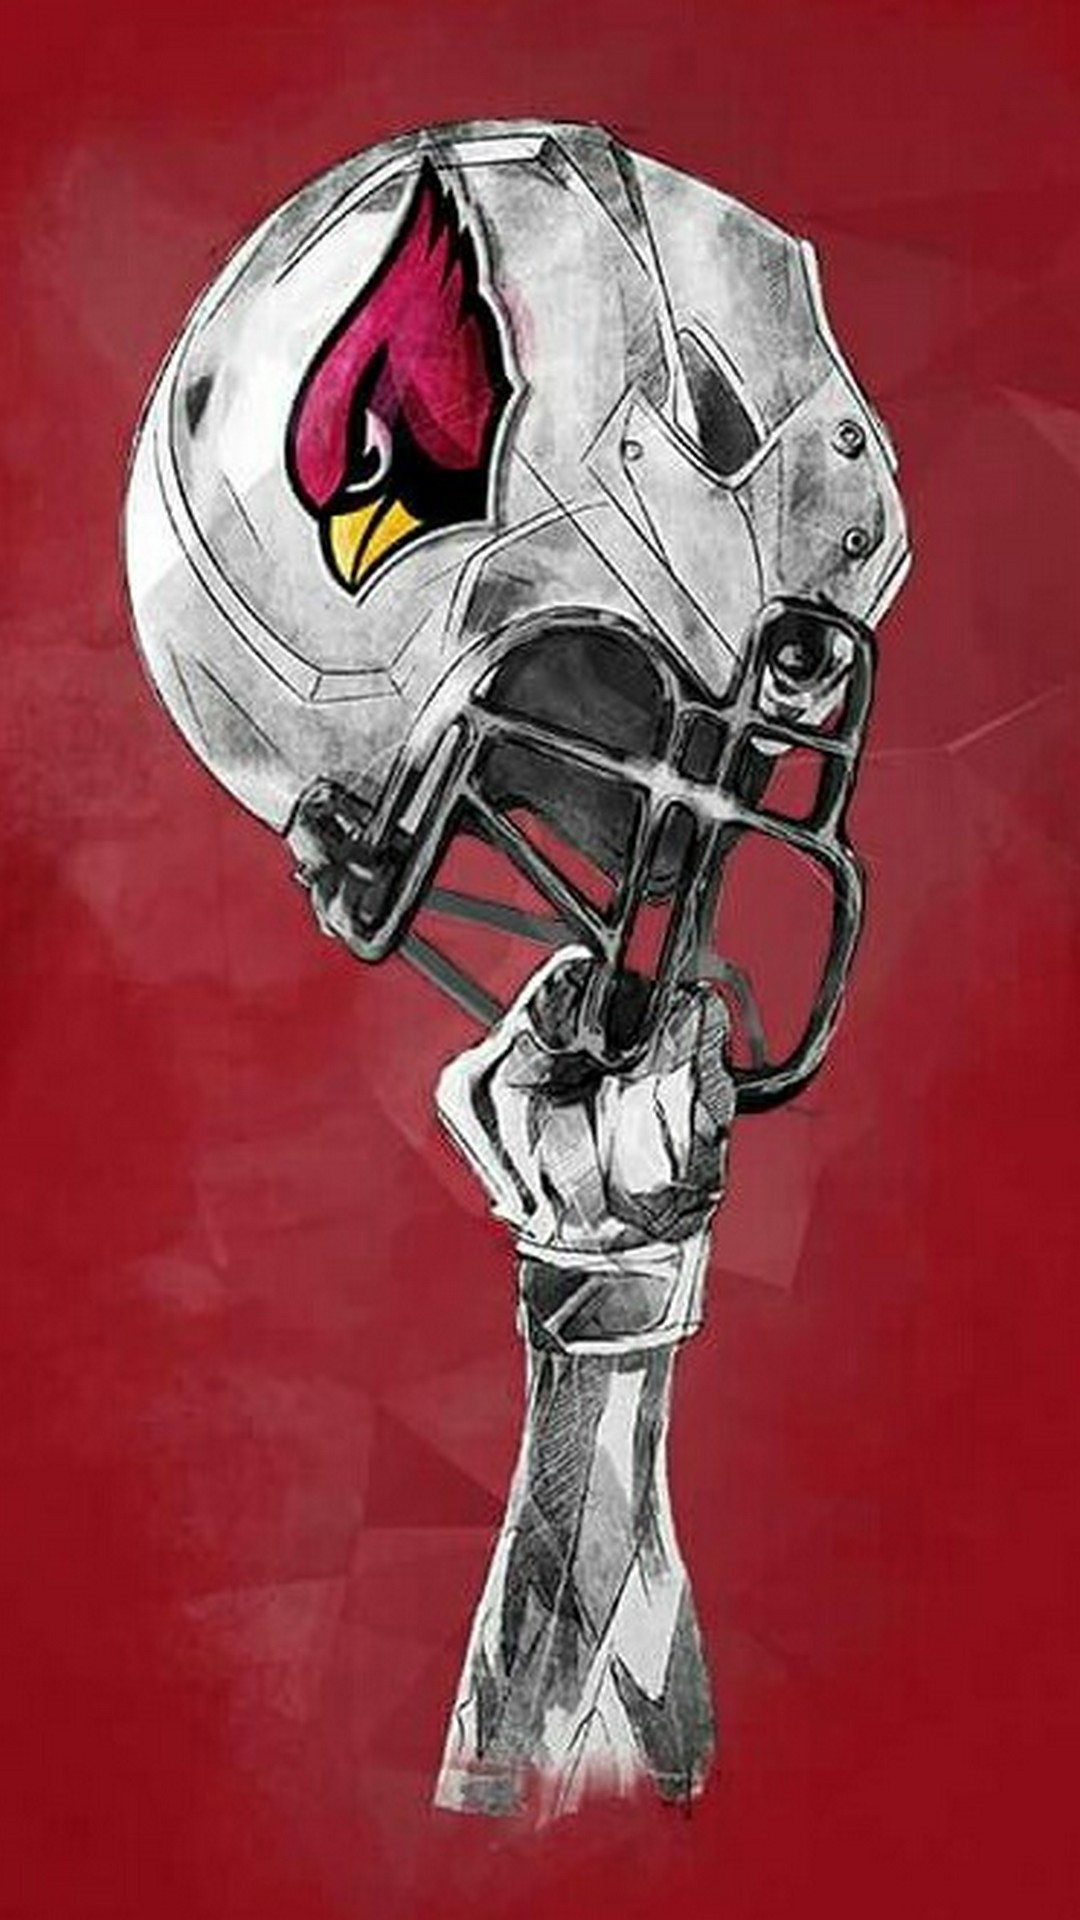 Screensaver iPhone Arizona Cardinals with high-resolution 1080x1920 pixel. Donwload and set as wallpaper for your iPhone X, iPhone XS home screen backgrounds, XS Max, XR, iPhone8 lock screen wallpaper, iPhone 7, 6, SE and other mobile devices